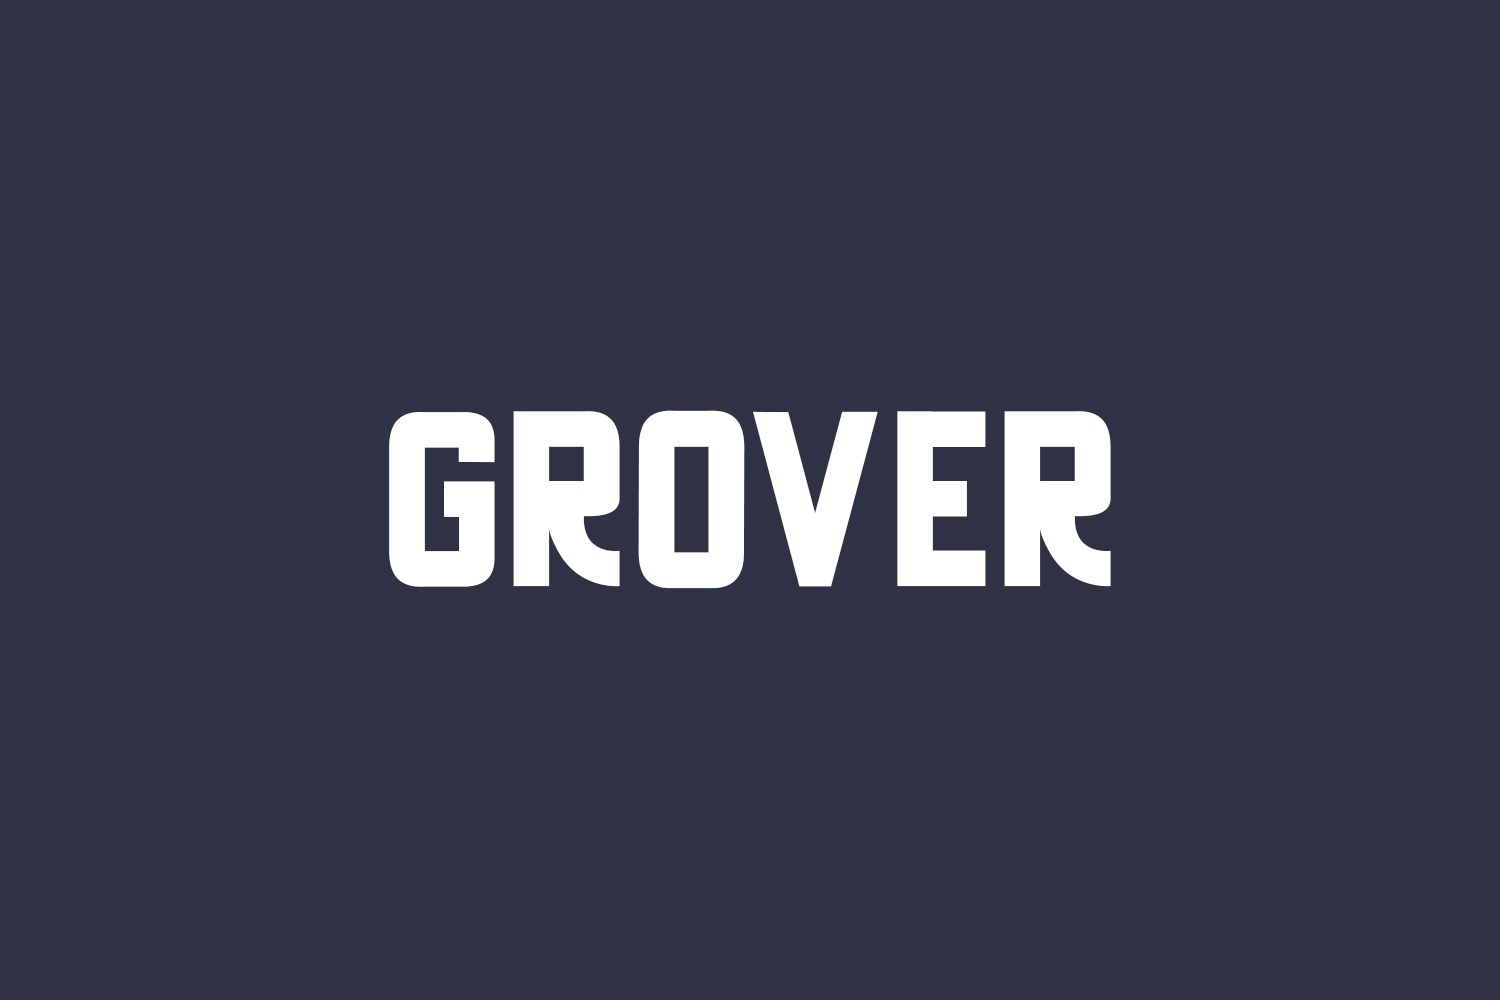 Grover Free Font